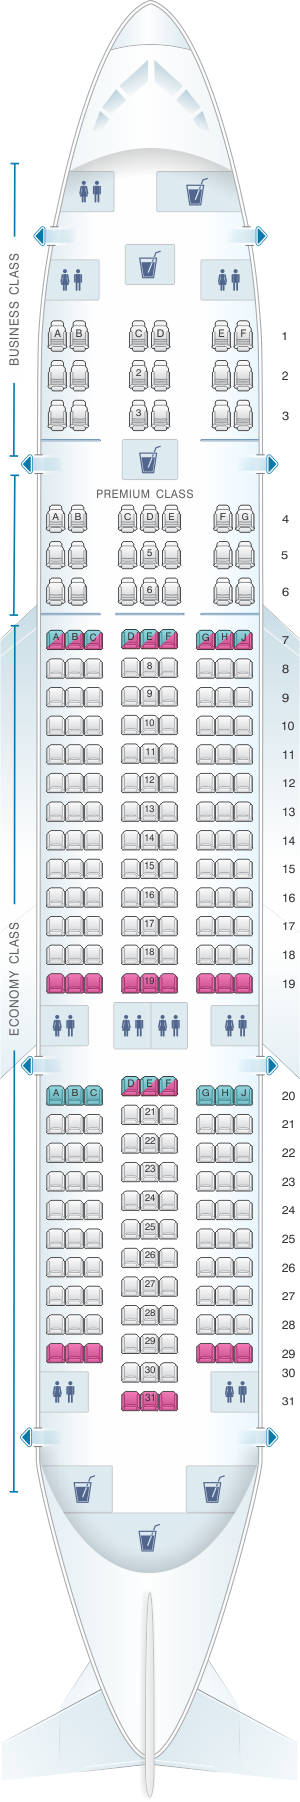 Boeing 787 9 Seat Map United Two Birds Home